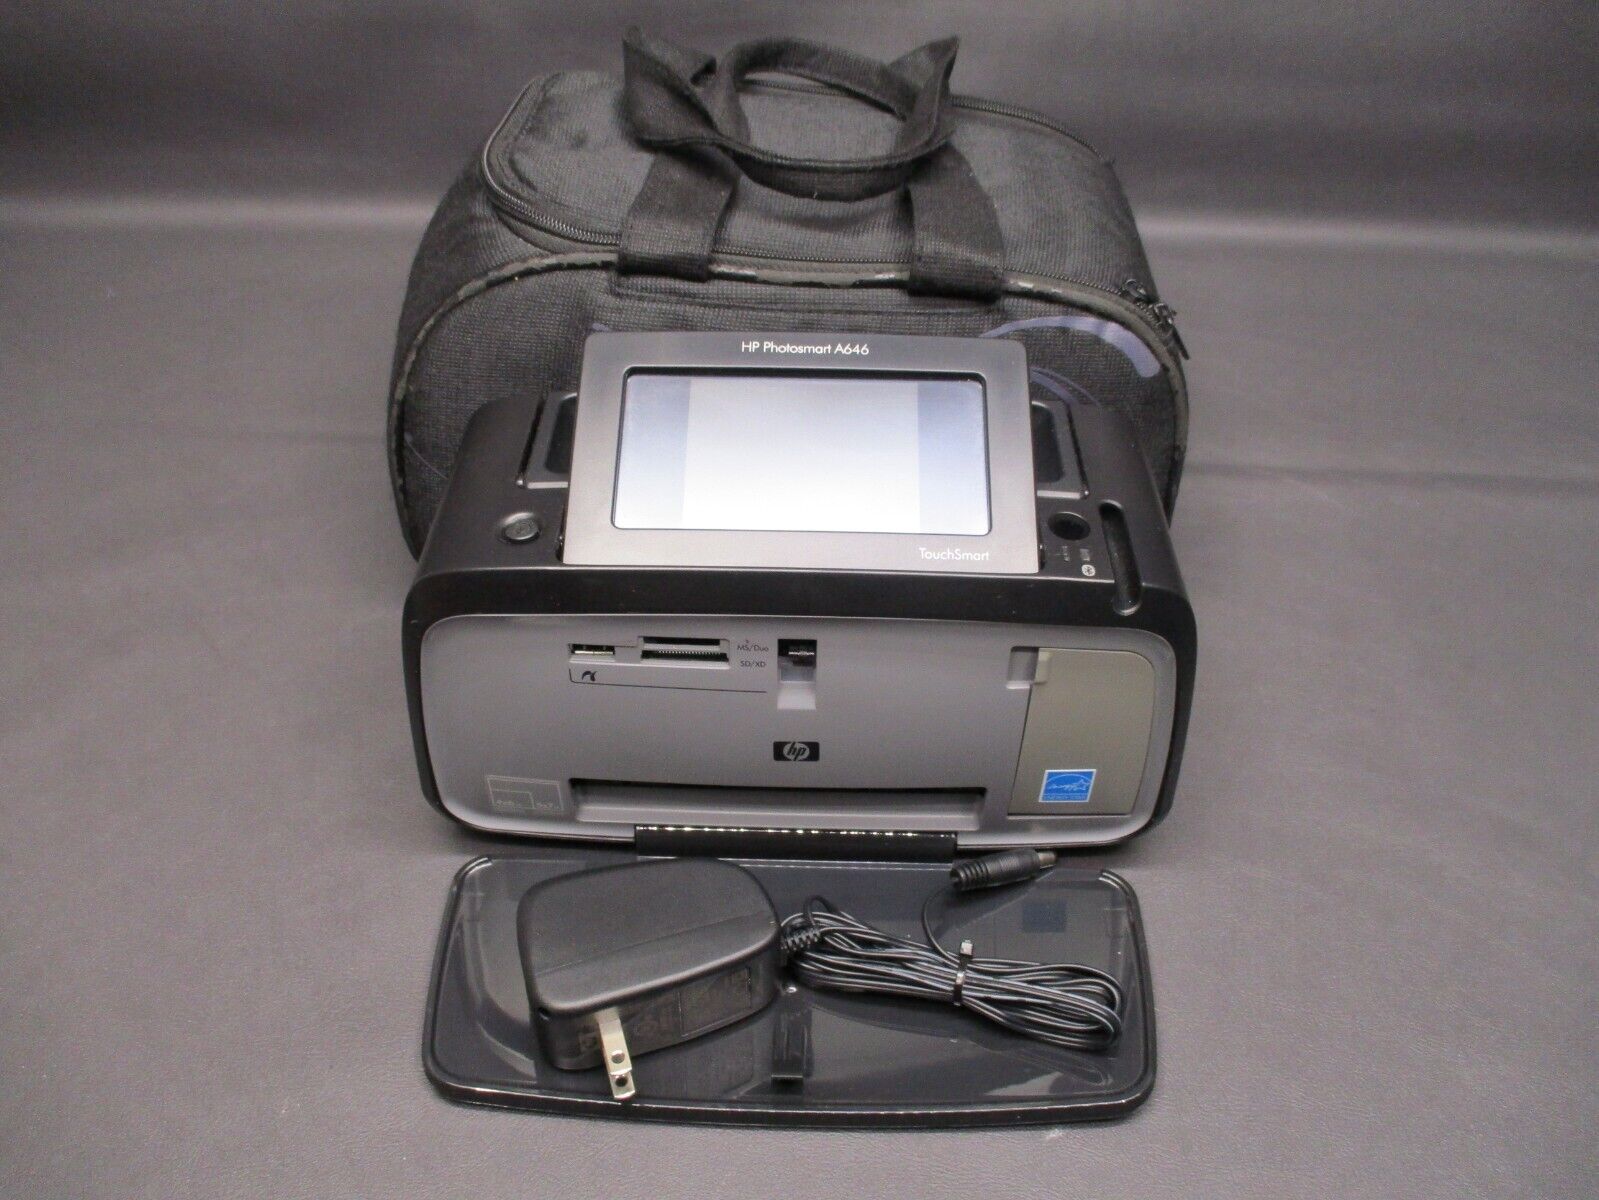 HP Photosmart A646 Compact Photo Printer W/ Case - For Parts, Untested